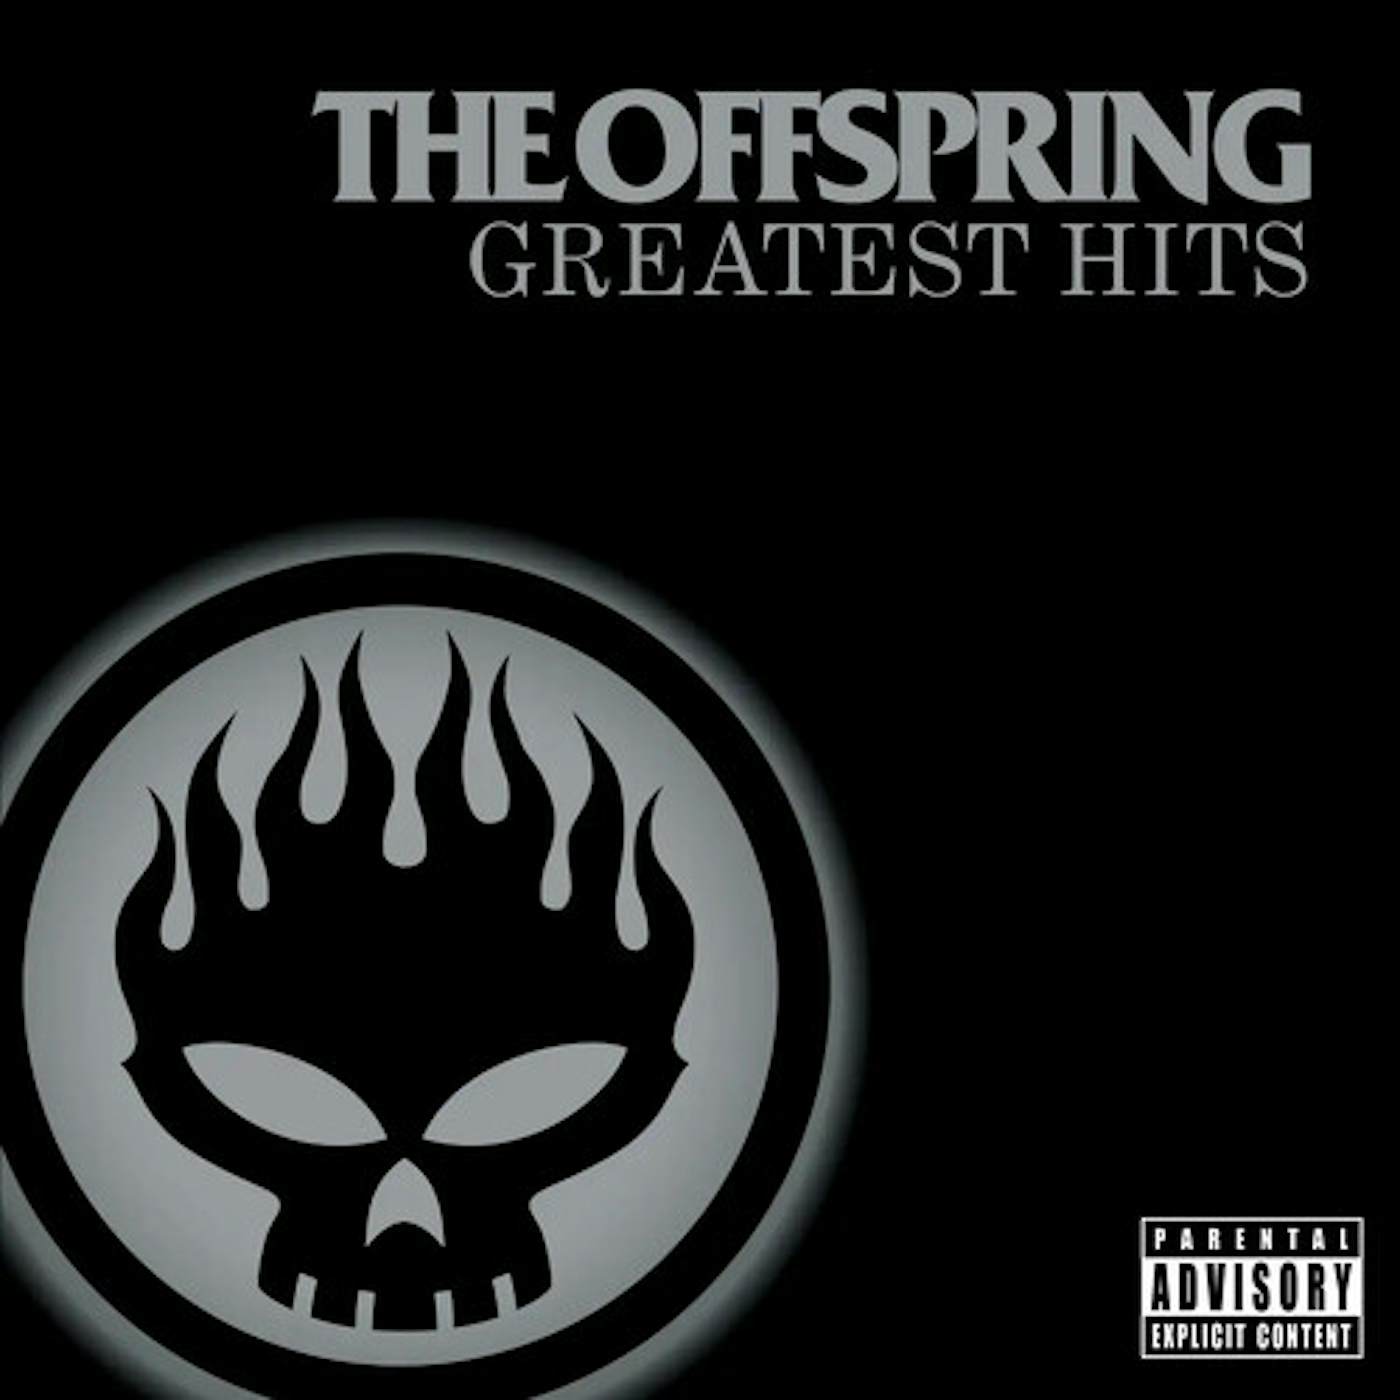 The Offspring Greatest Hits Vinyl Record